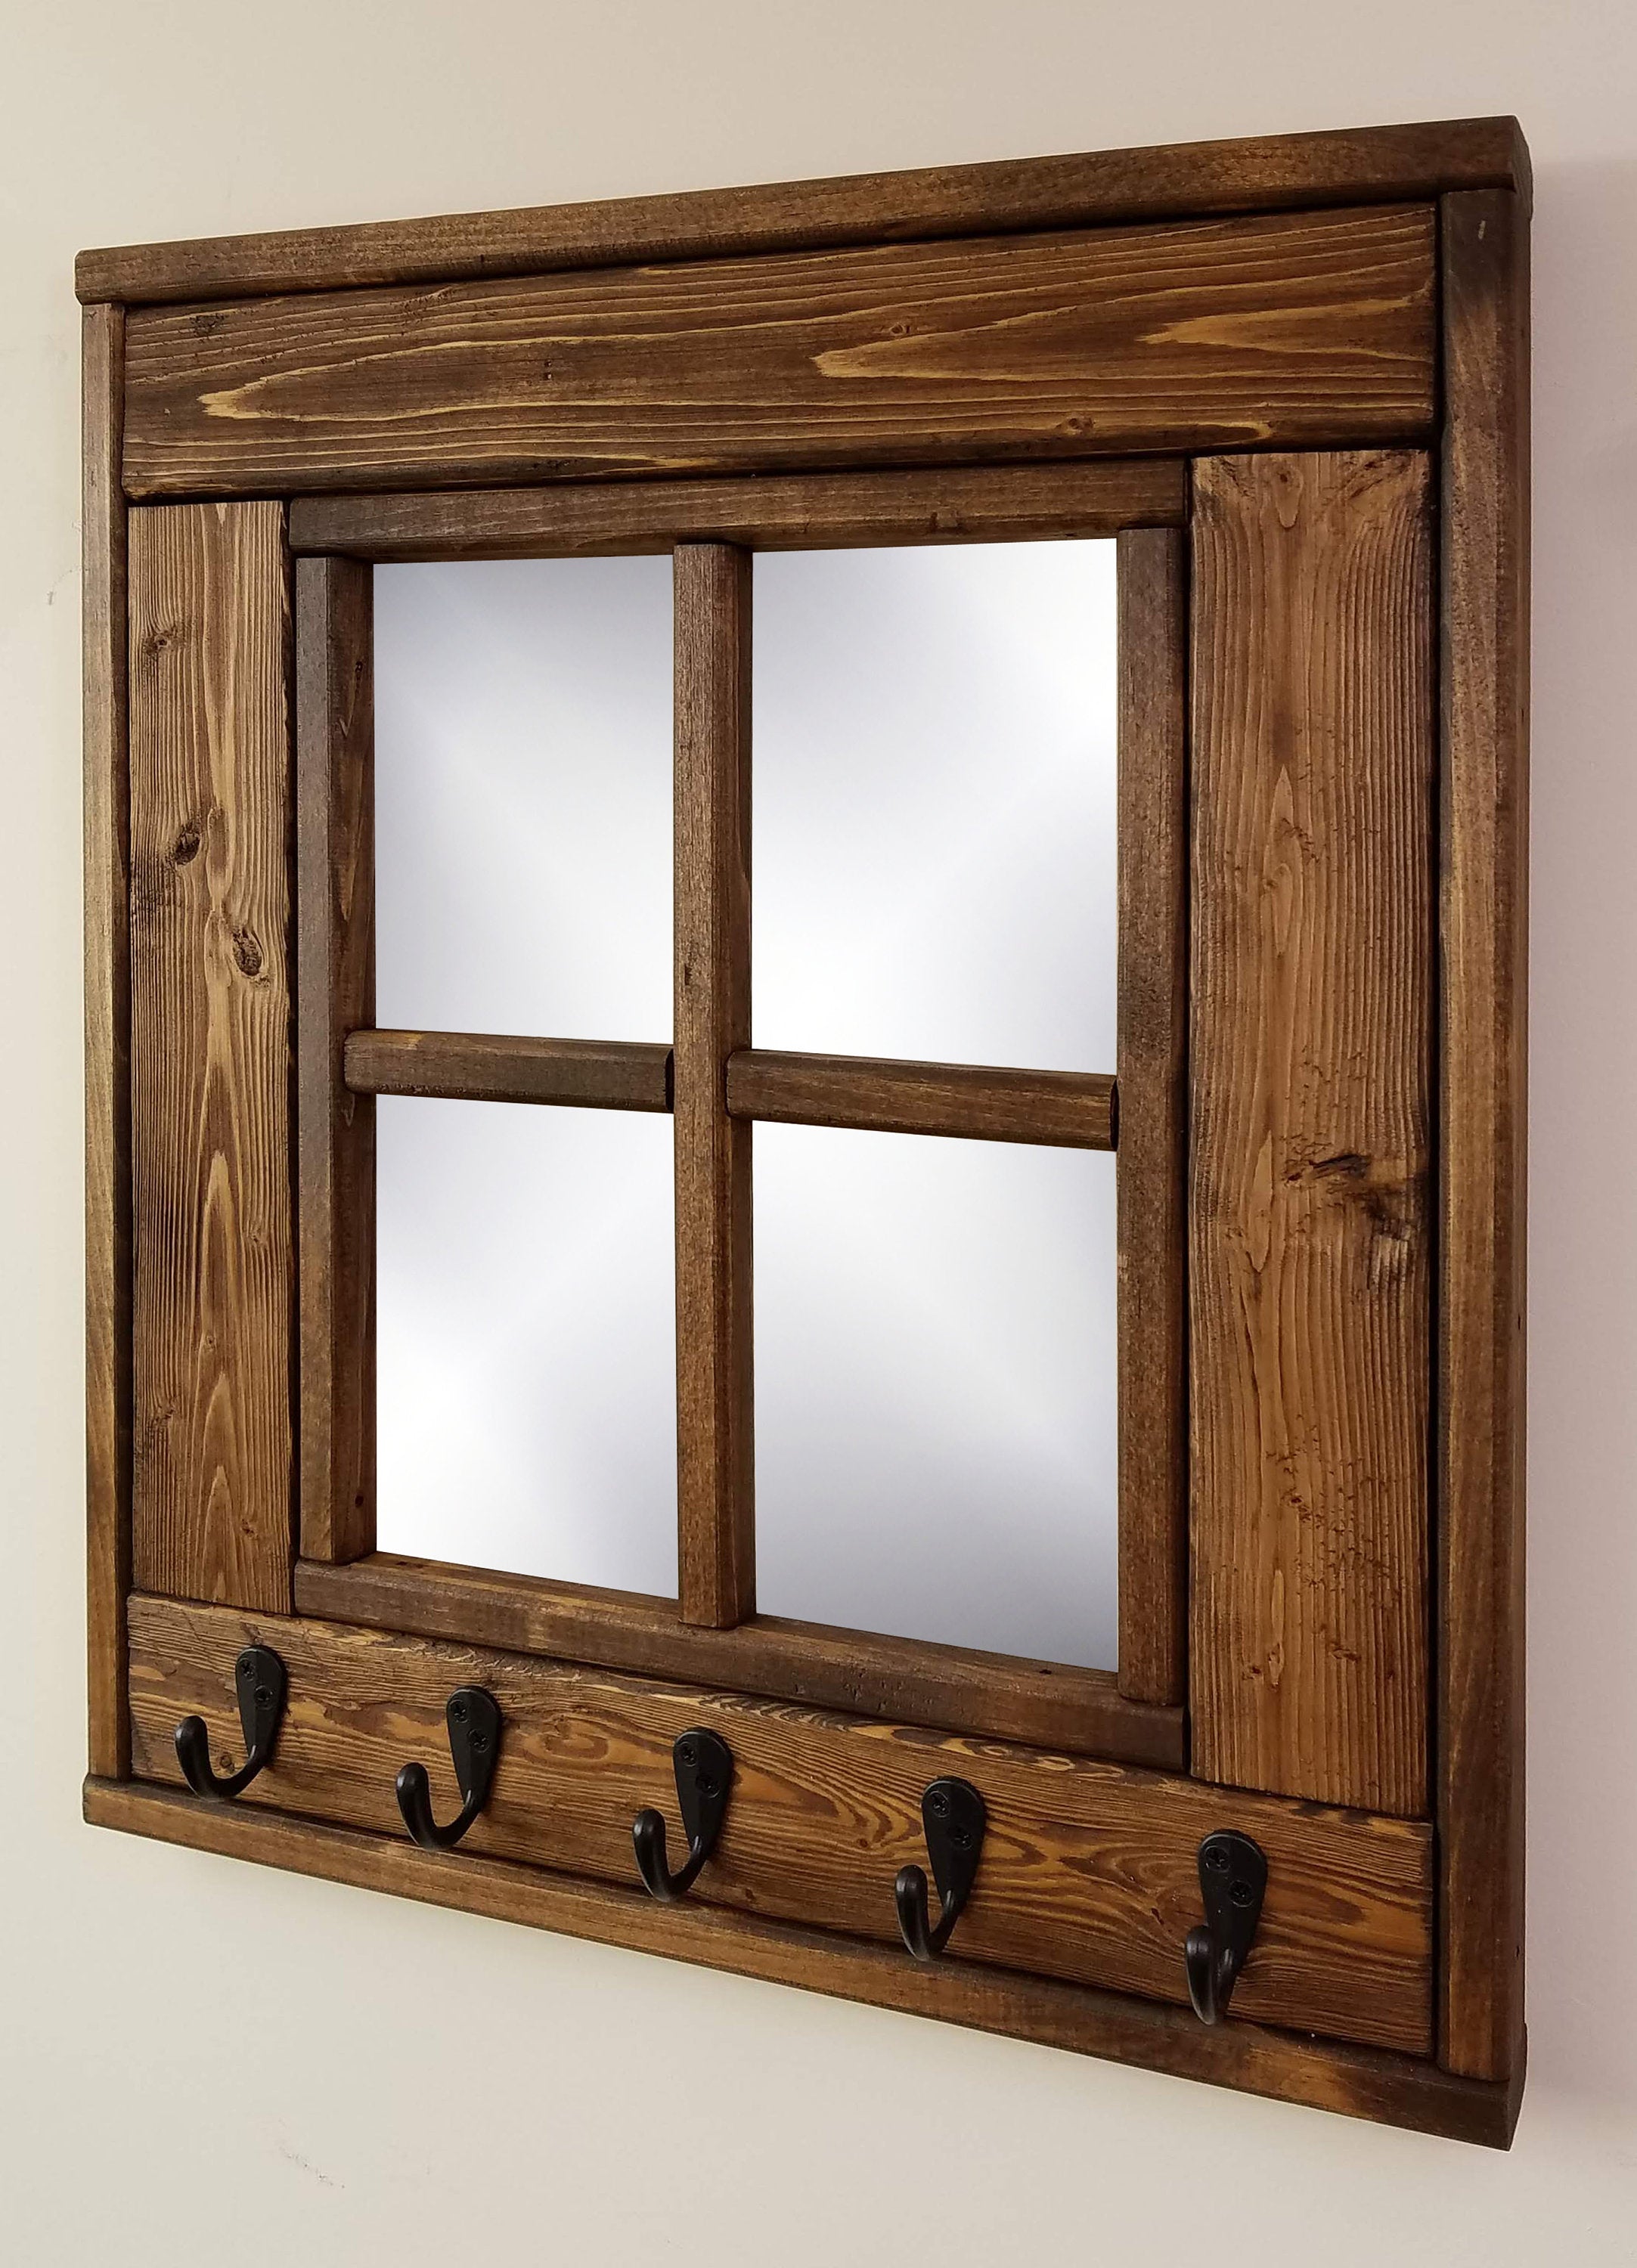 Barn Window Mirror With Hooks - 20 Stain Colors, Shown in Special Walnut